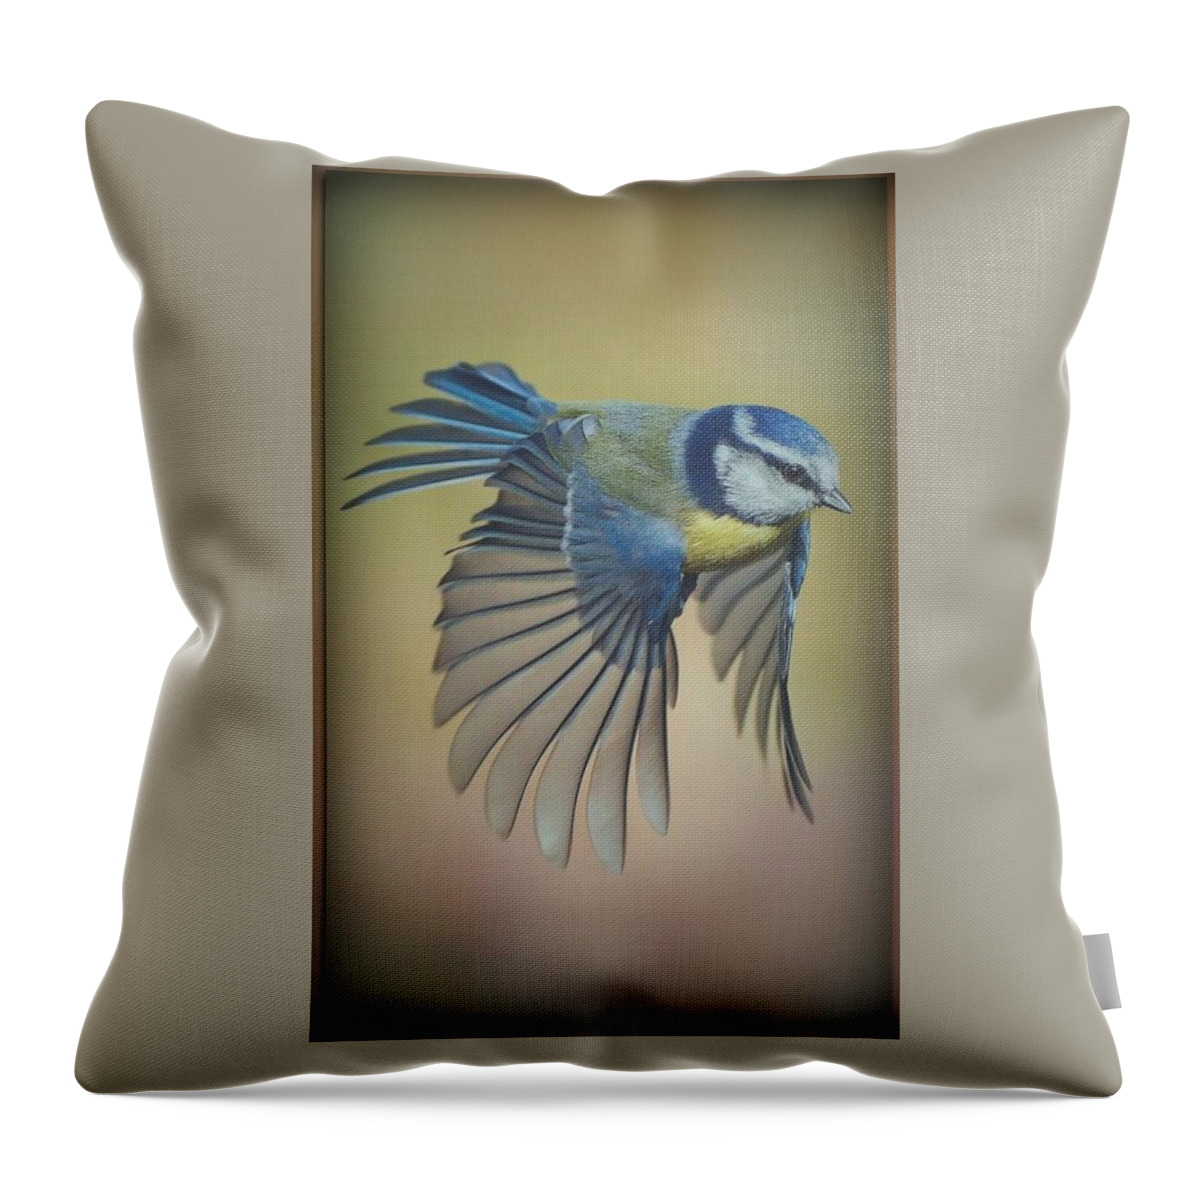  Throw Pillow featuring the photograph Flight 22 by David Norman